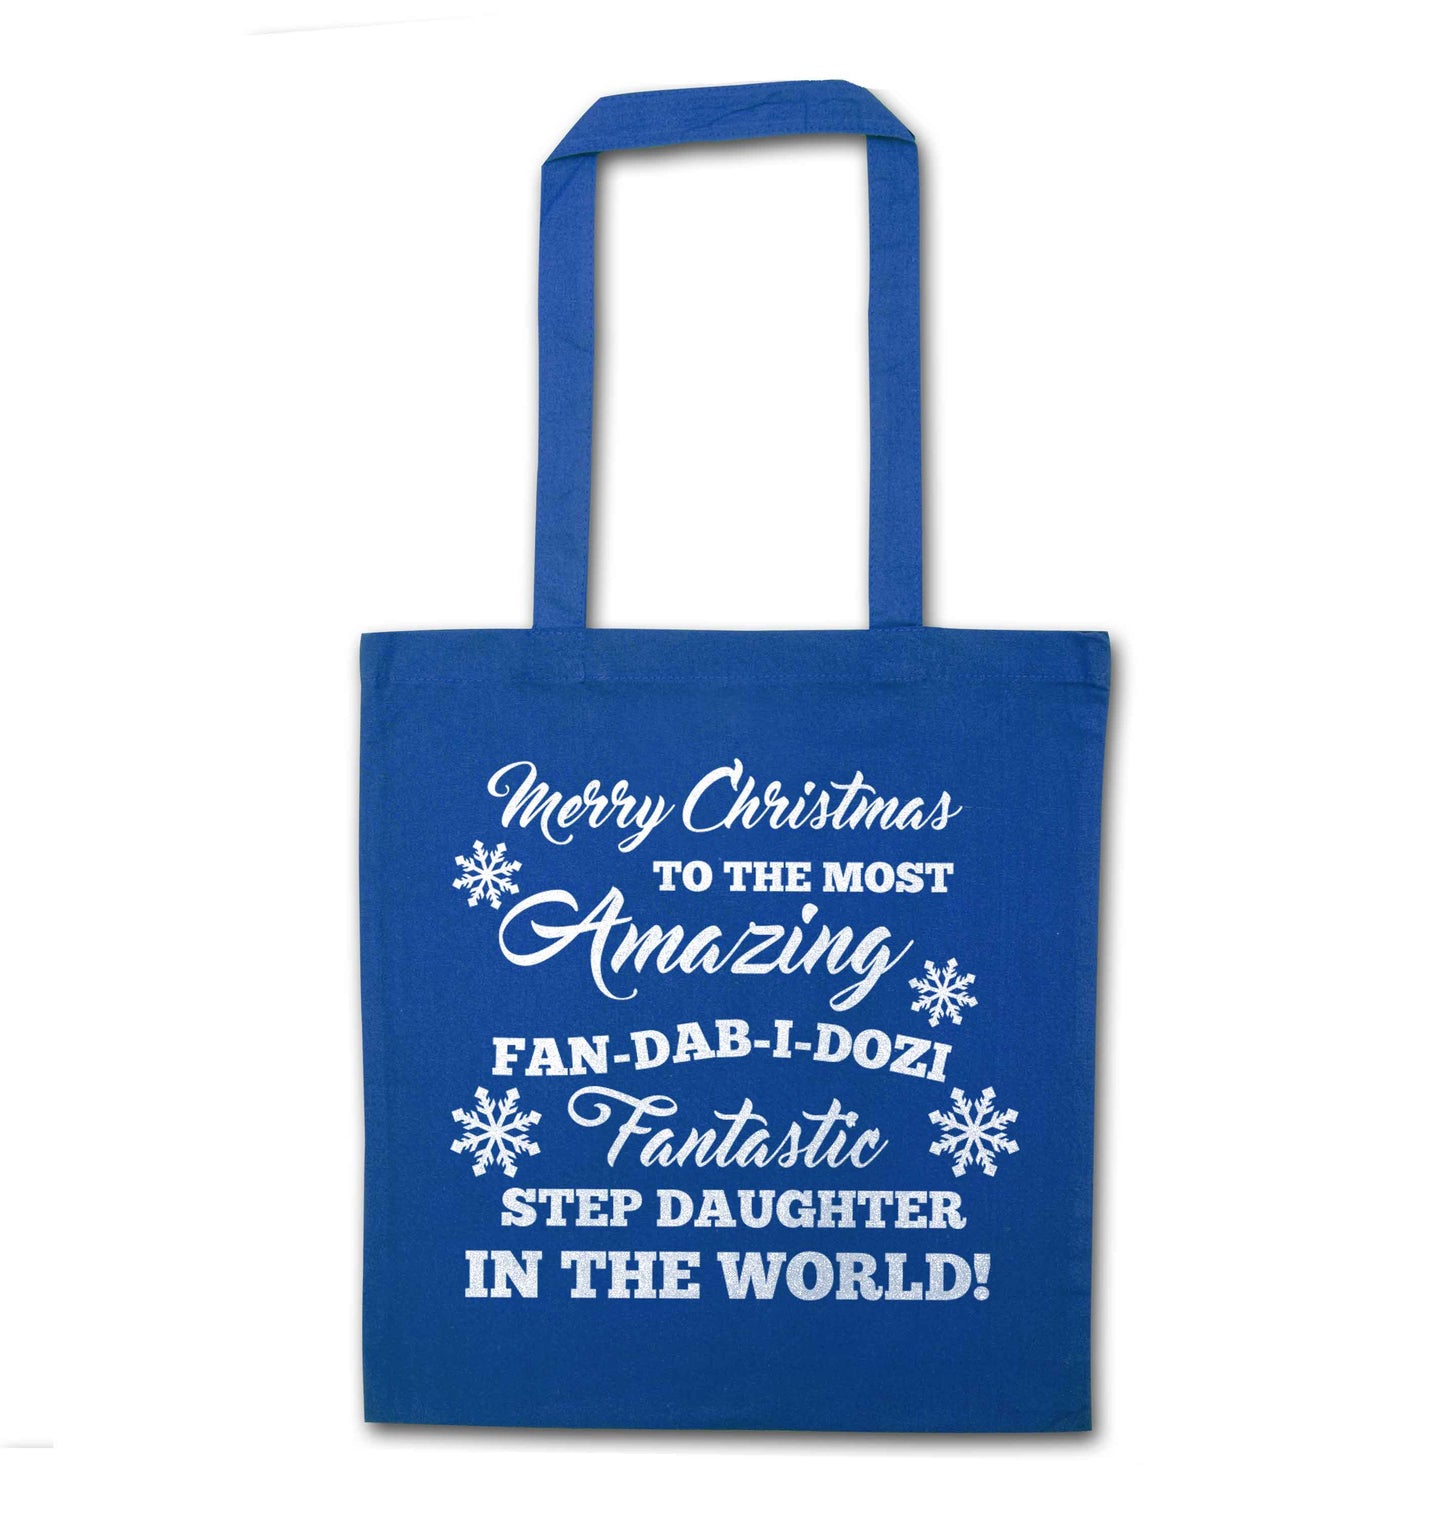 Merry Christmas to the most amazing fan-dab-i-dozi fantasic Step Daughter in the world blue tote bag